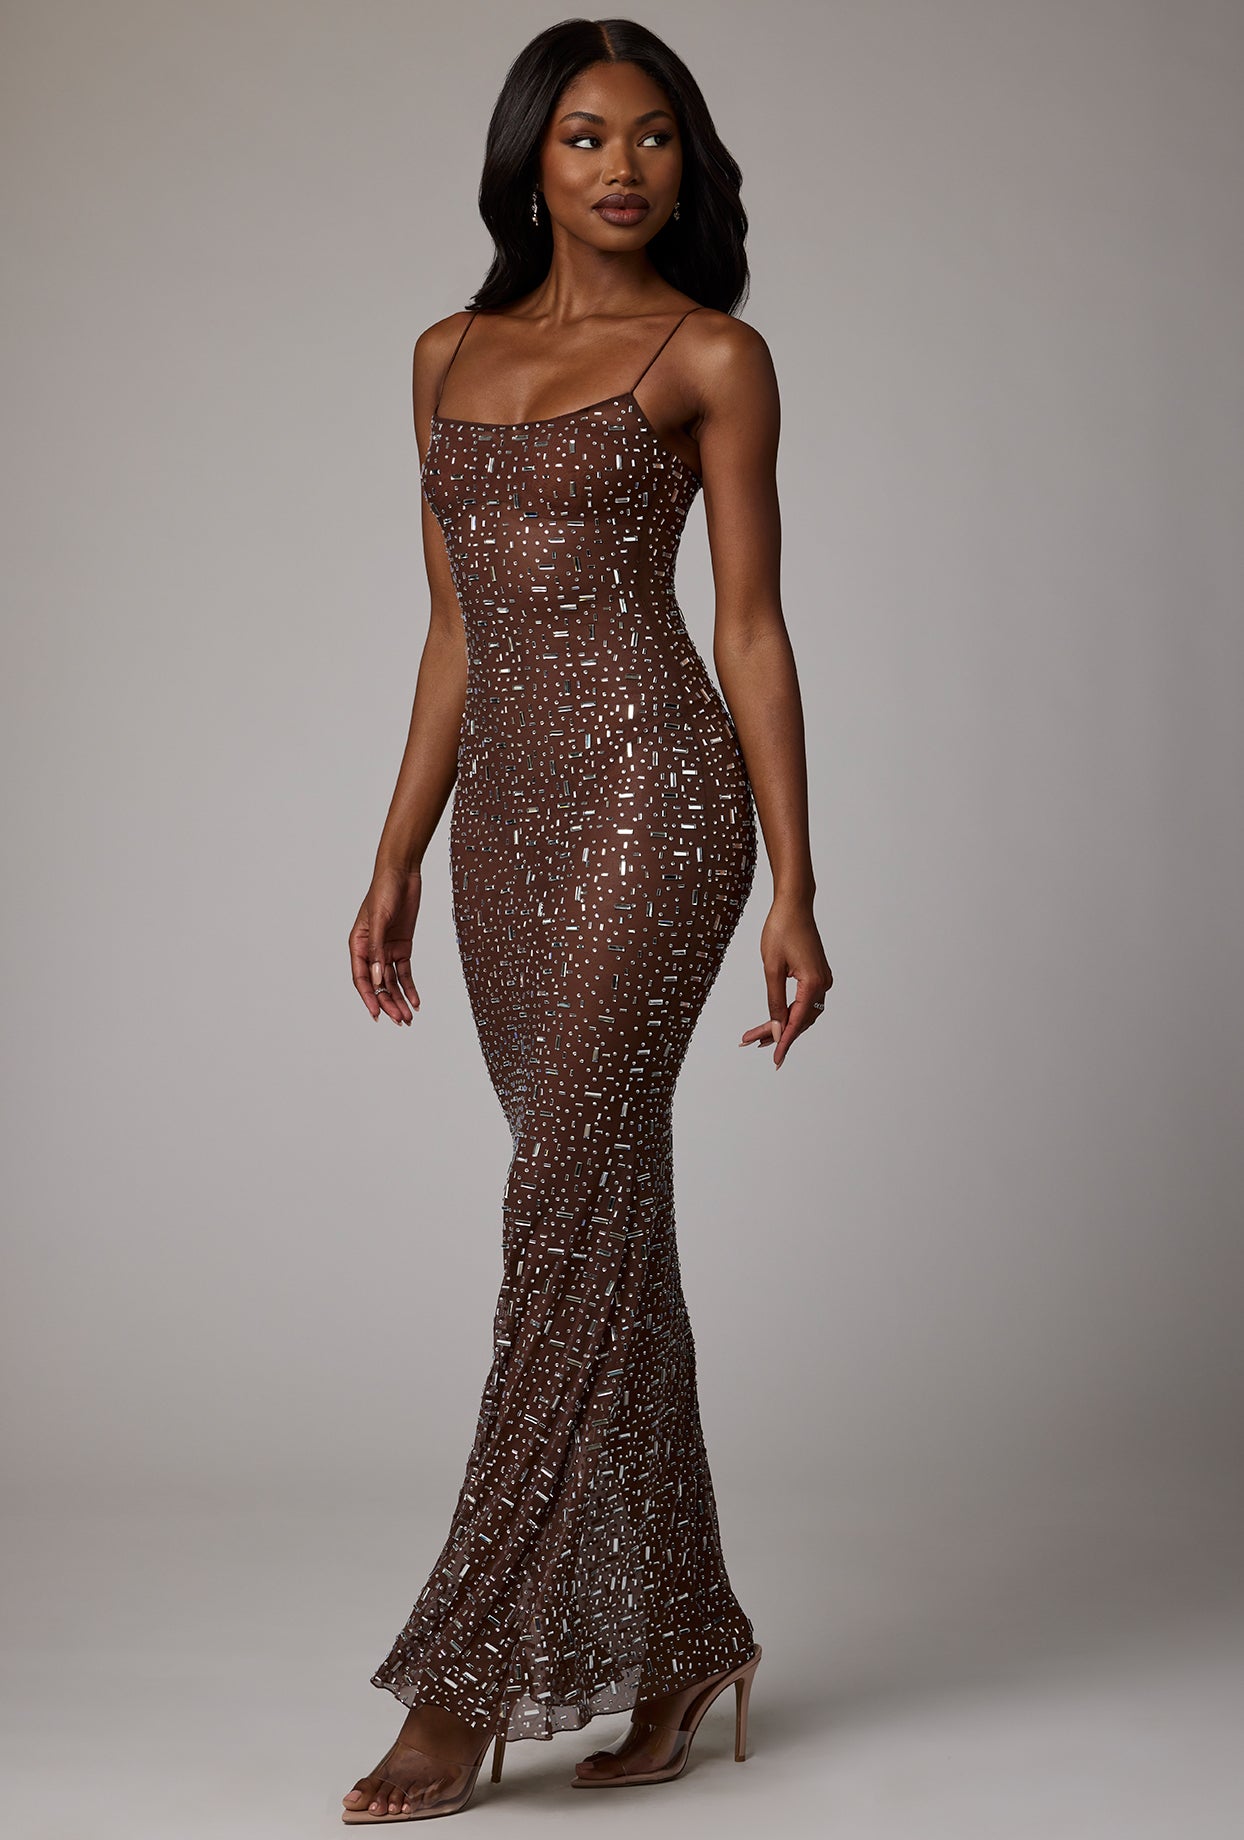 Shop Bariano Sorrento Scoop Neck Ball Gown in Black/Gold | Miss Savage –  Miss Savage Fashion